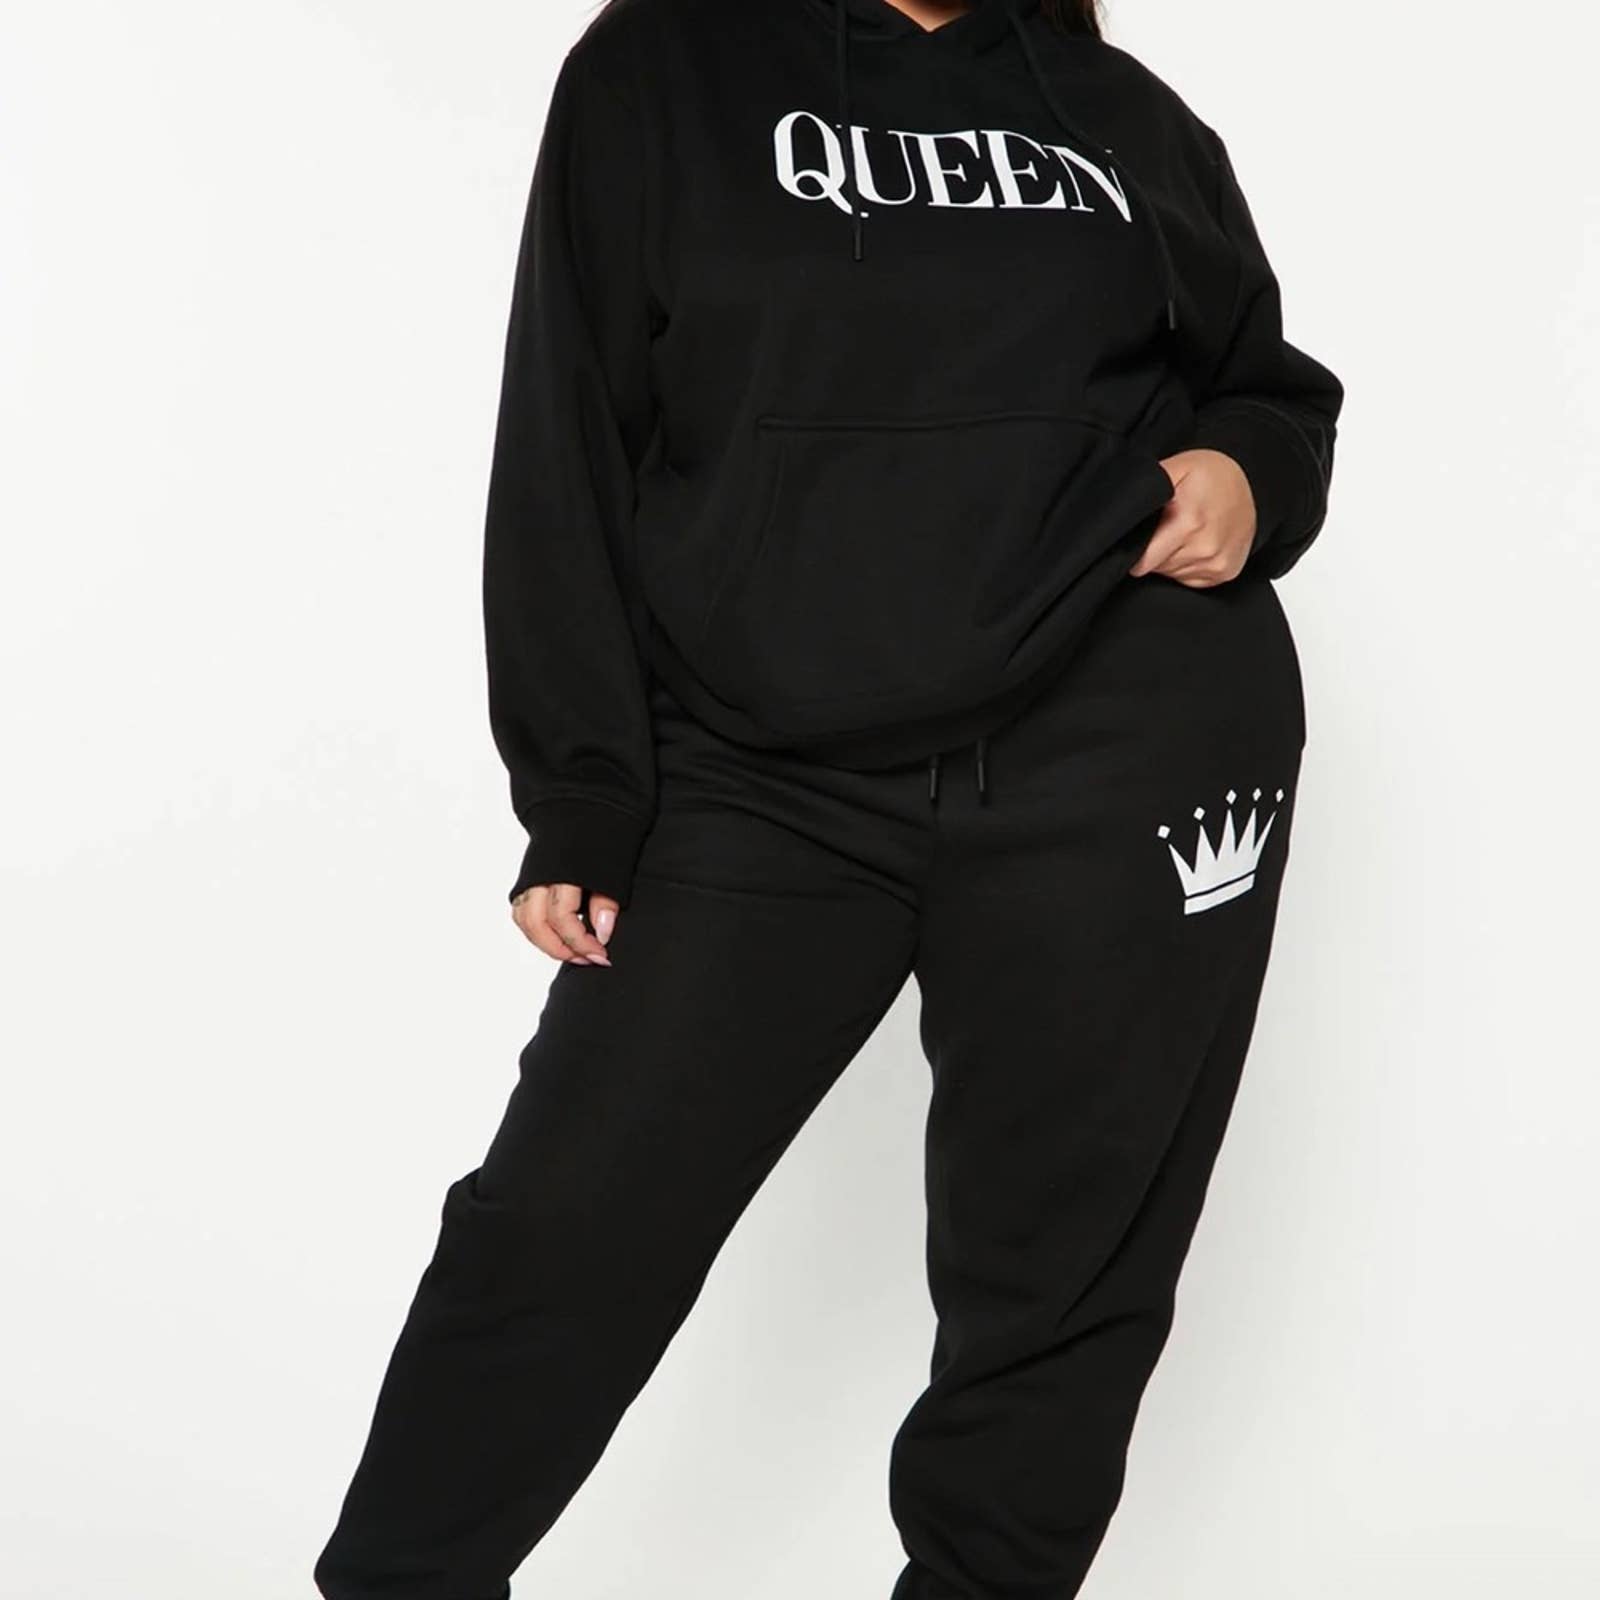 Oversized Black Queen Hoodie Custom Made by Passion of Essence - Passion of Essence Boutique